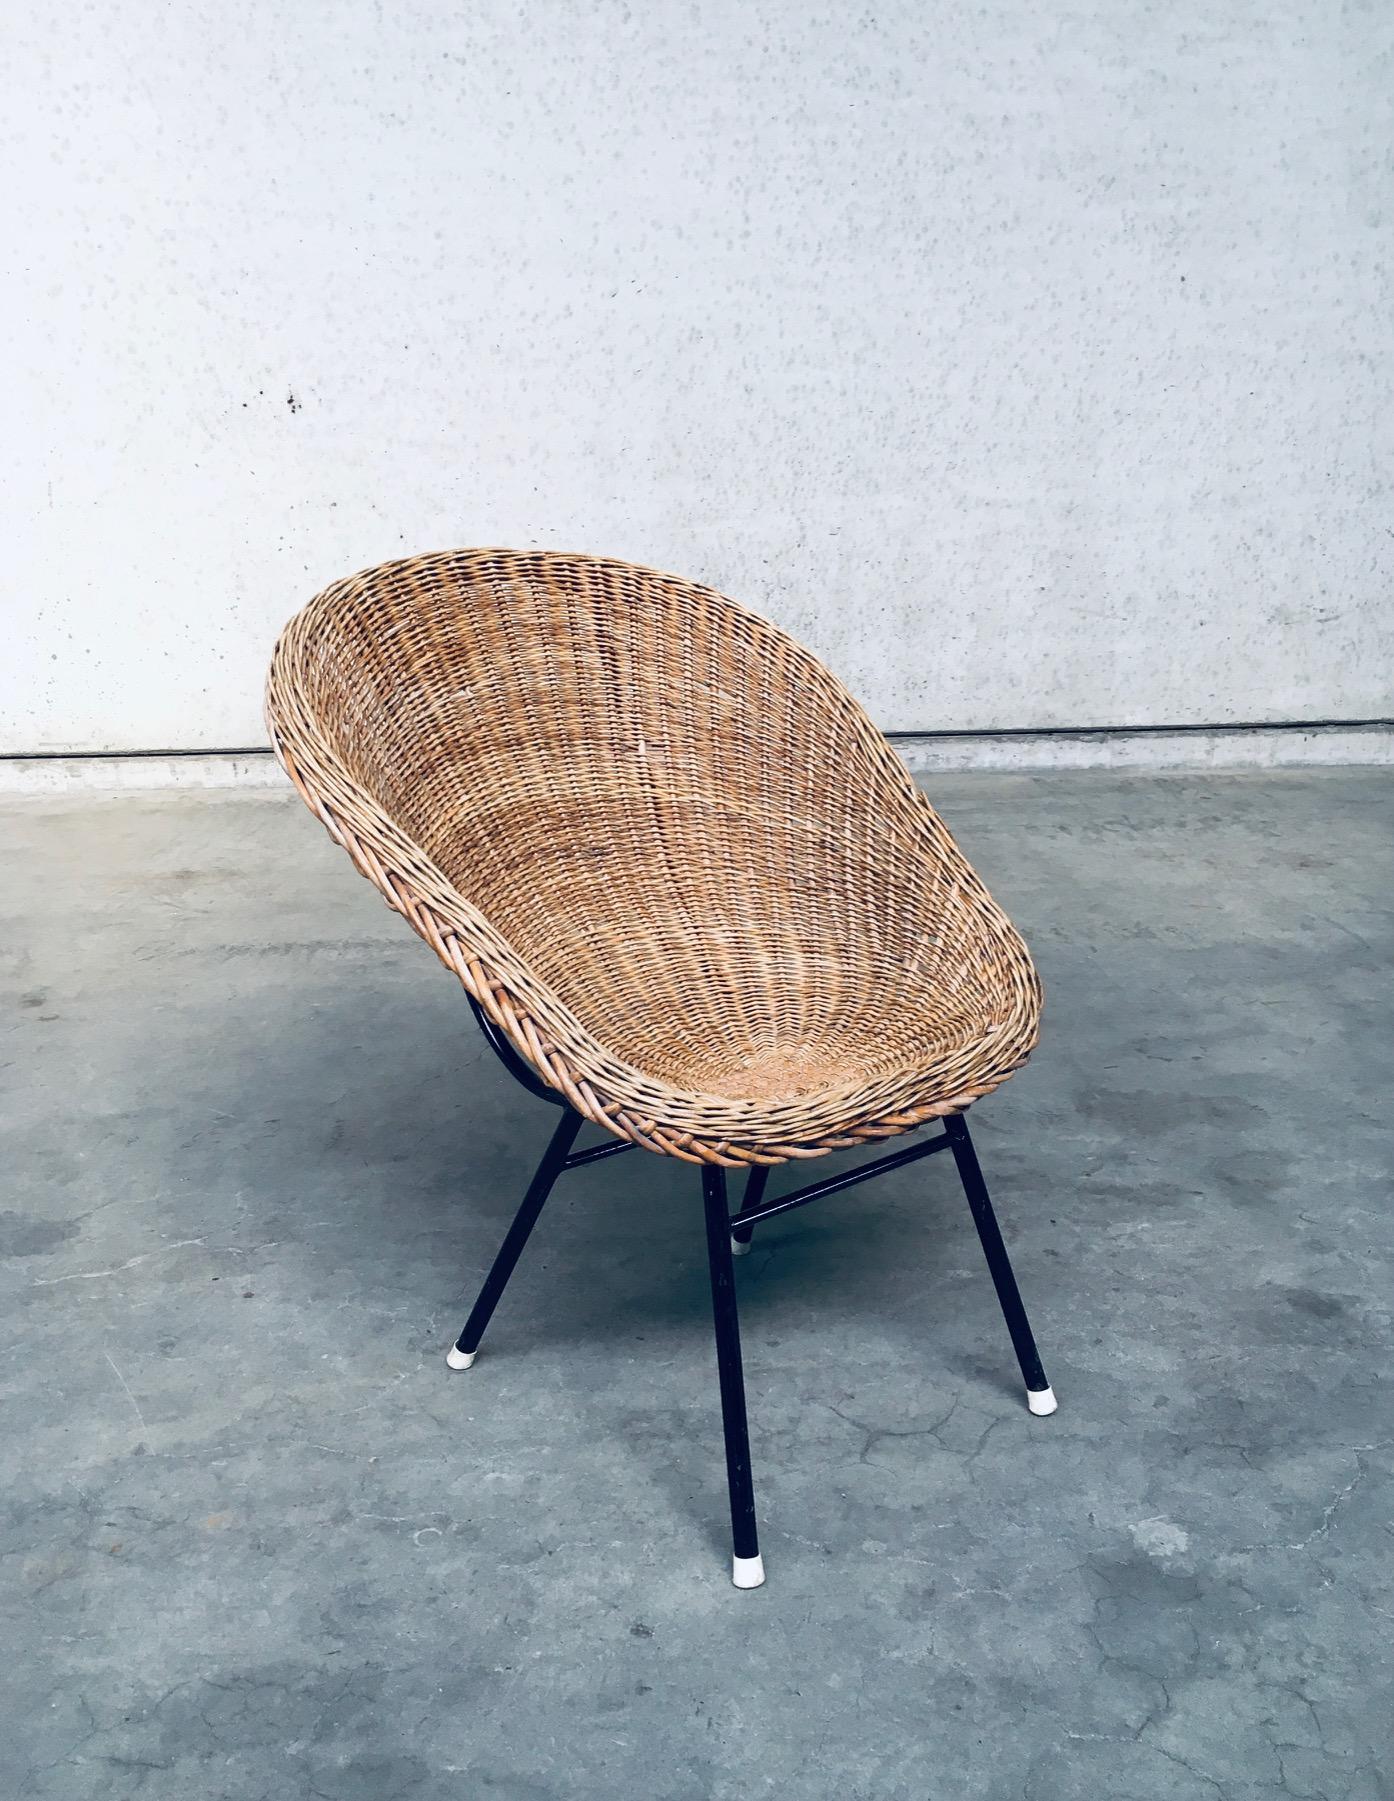 Vintage Midcentury Modern Dutch Design Wicker Lounge Chair in the Style of Dirk Van Sliedregt for Rohé Noordwolde. Made in the Netherlands, 1960's. Wicker rattan seat on black lacquered steel frame with original white plastic covers on the feet.